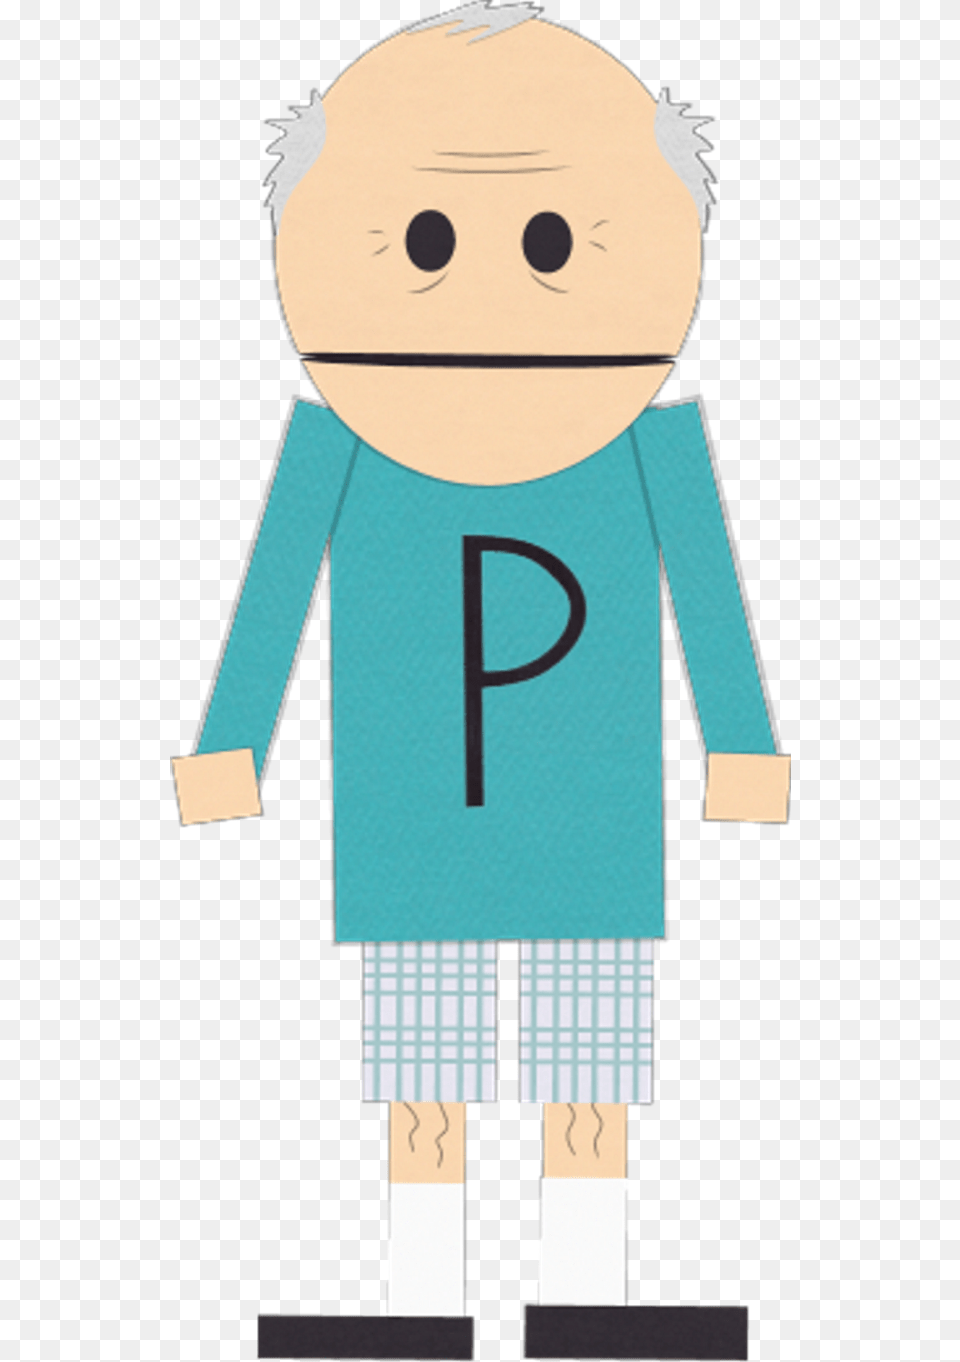 Canadian Celebrities Old Philip South Park Terrance And Phillip, Person, Face, Head, Nutcracker Png Image